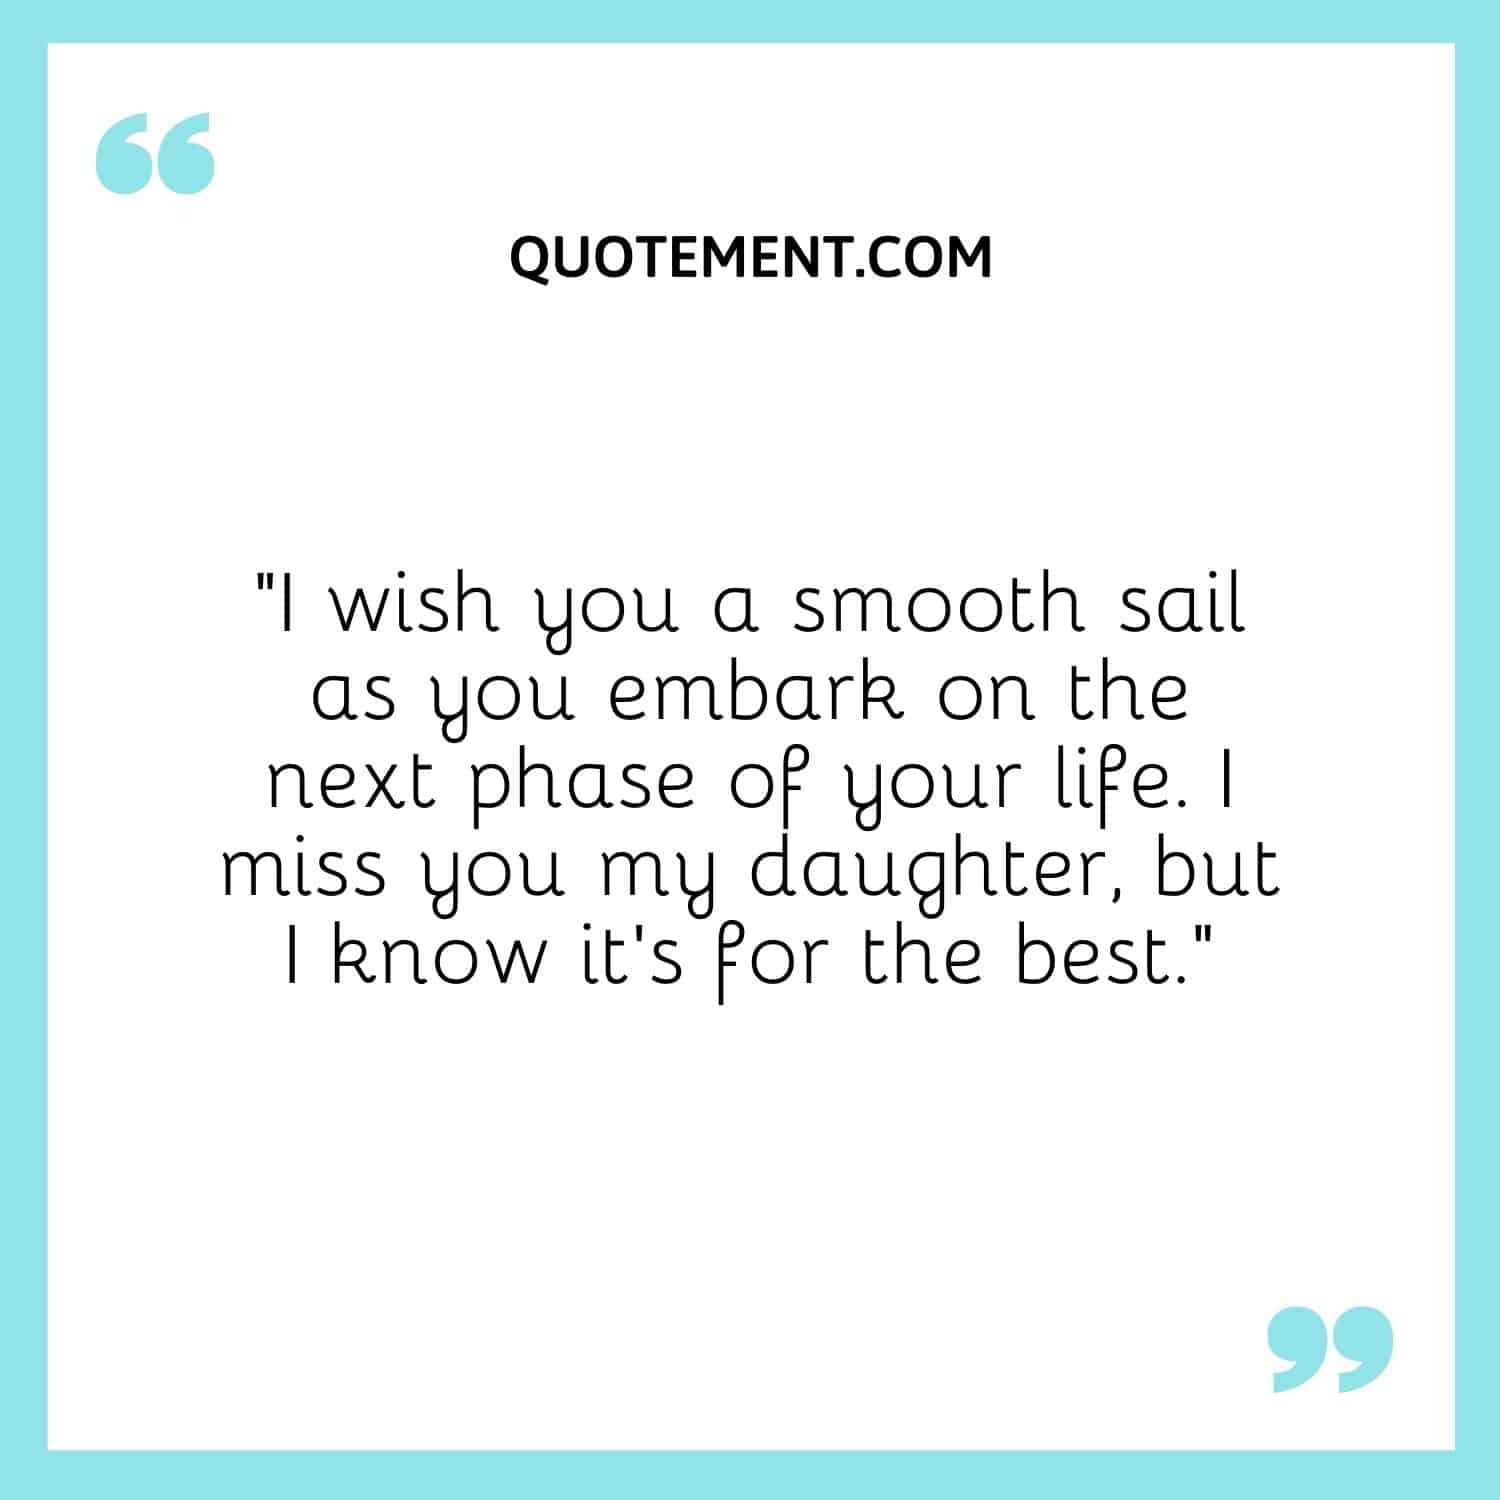 I wish you a smooth sail as you embark on the next phase of your life.